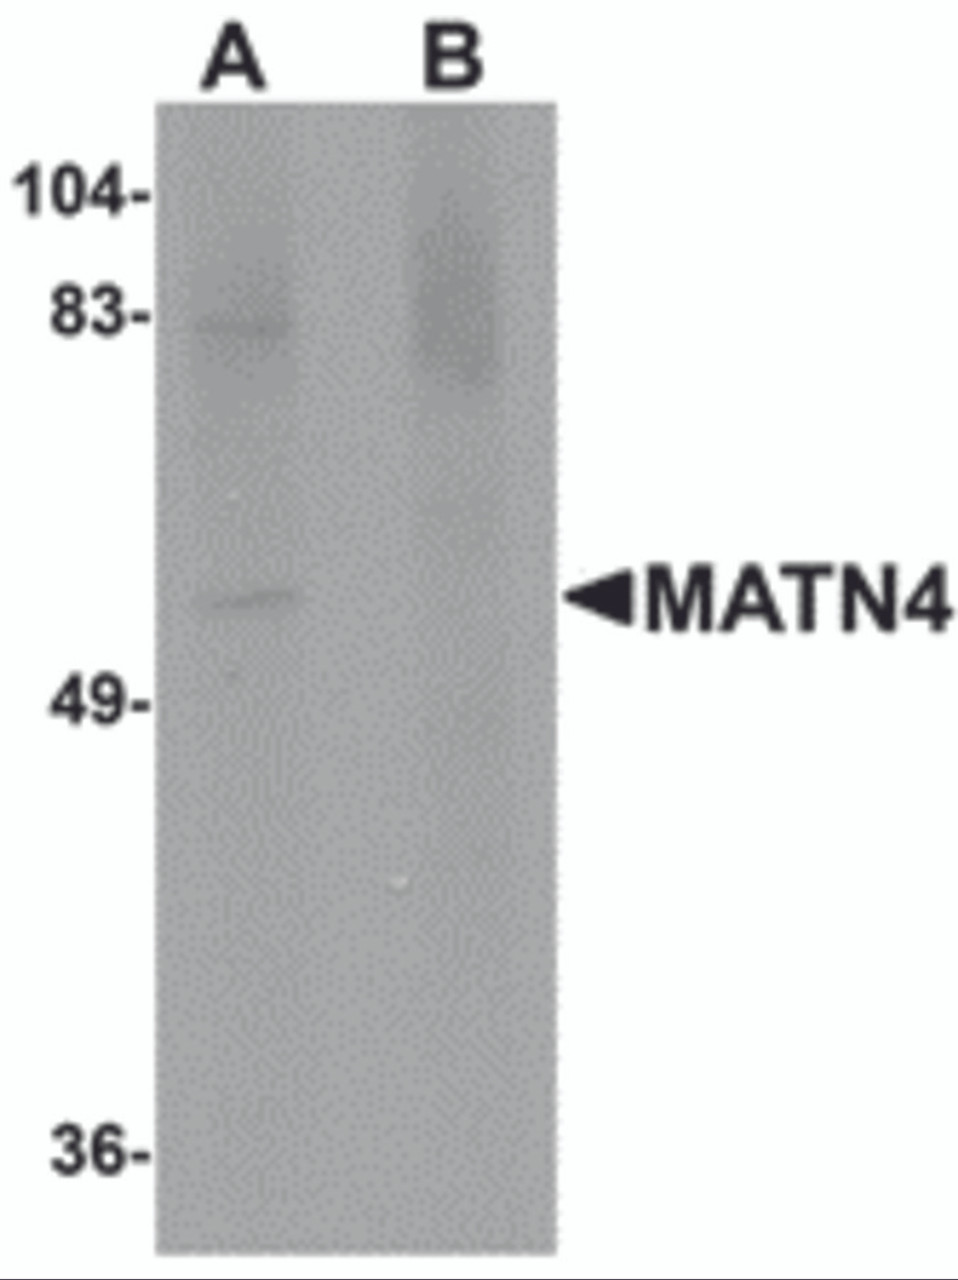 Western blot analysis of MATN4 in rat brain tissue lysate with MATN4 antibody at 1 &#956;g/mL in (A) the absence and (B) the presence of blocking peptide.